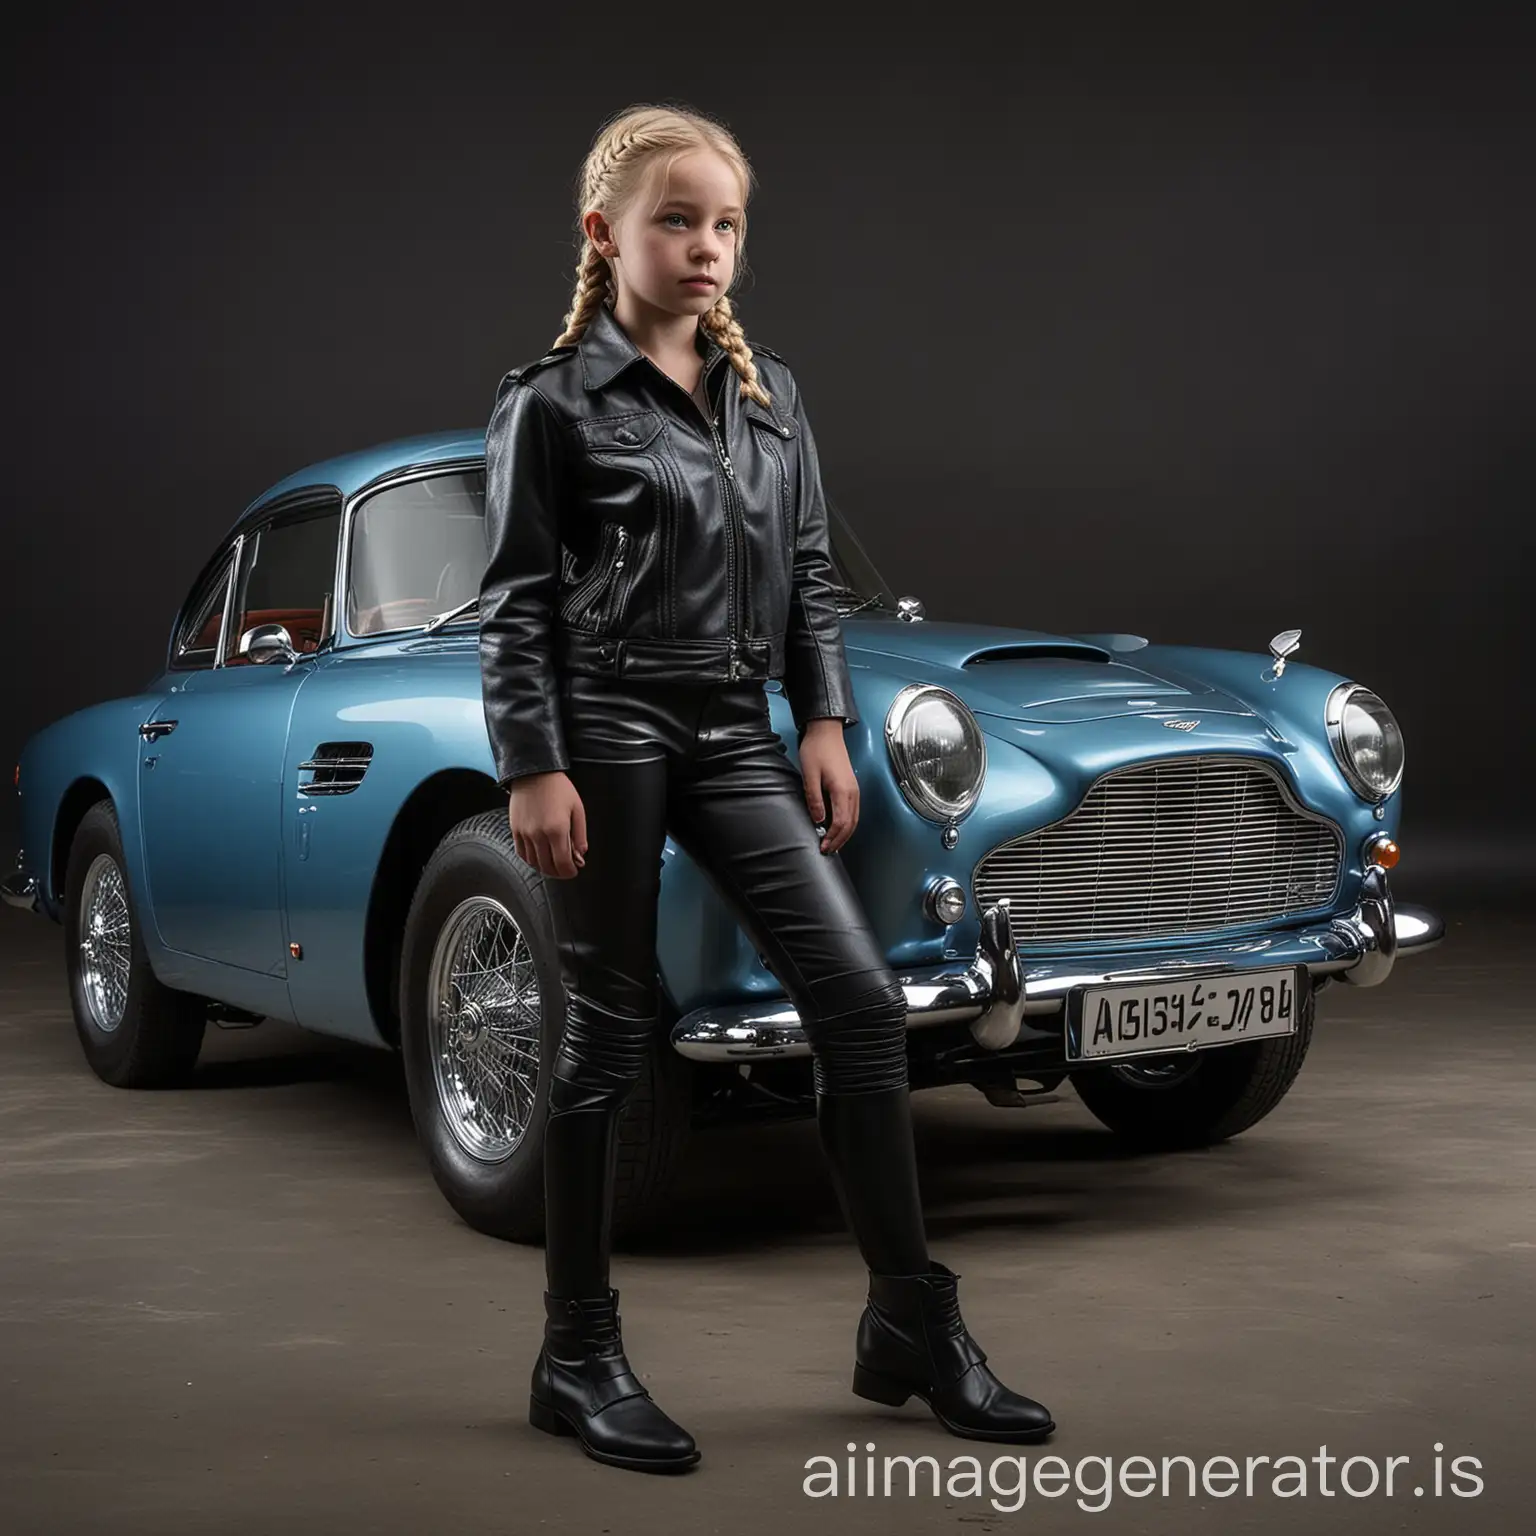 Automóvil Aston Martin db4 color azul metalizado with chromed wheels and fenders, in 3/4 profile, with an 11 year old girl stopped in front of the car, blonde with two braids in her hair, freckles, blue eyes, dressed in a black leather jacket and black leather pants and black boots, with a challenging gaze. All illuminated with lightpainting effect with black background